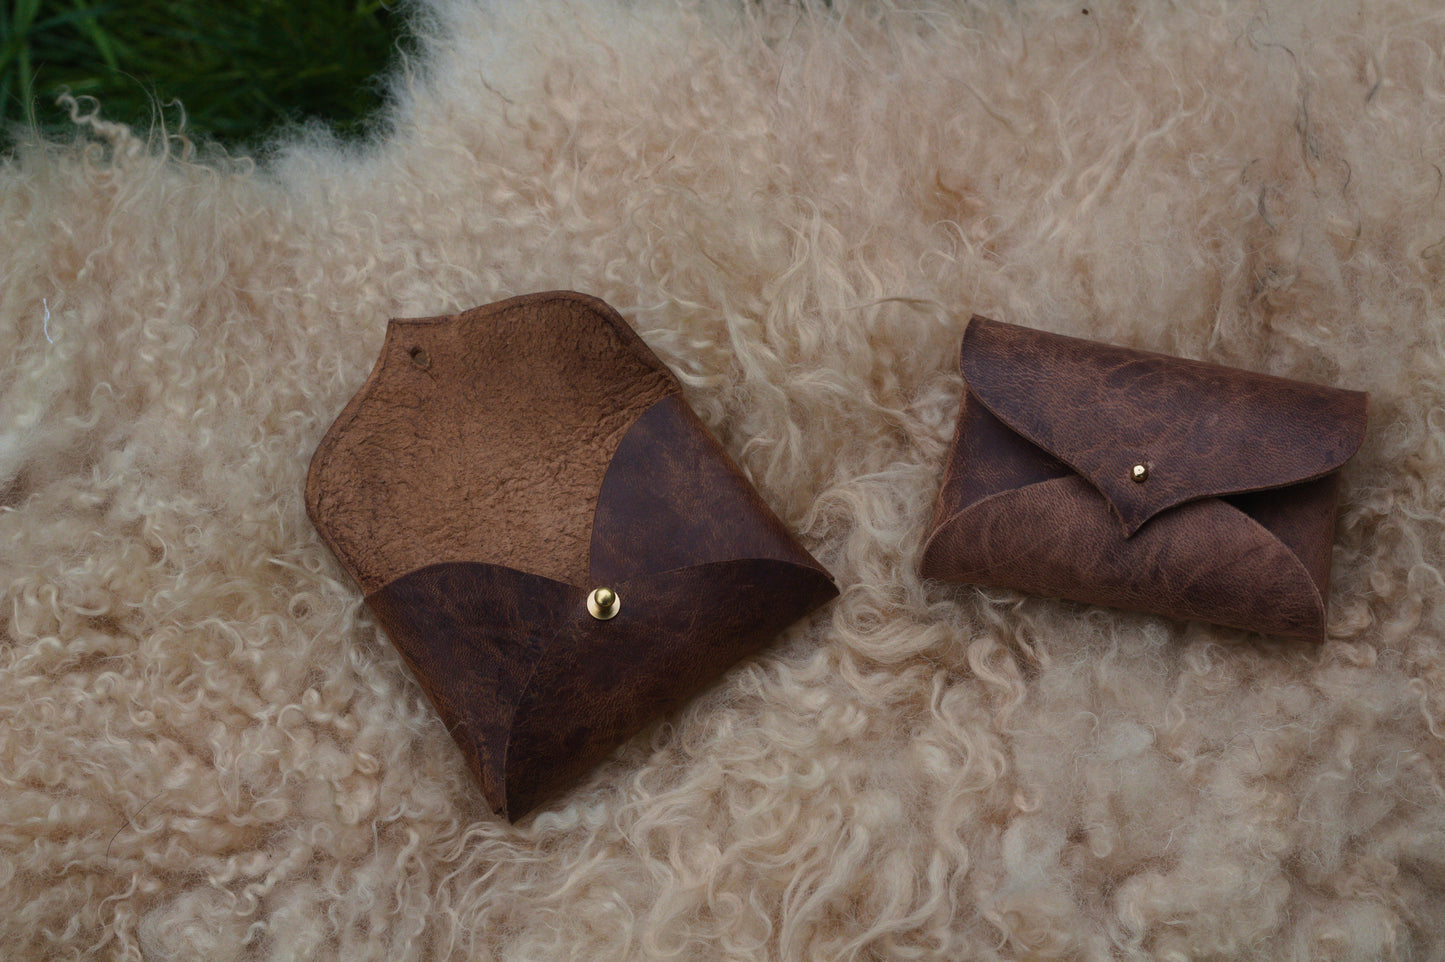 Deer leather coin purses